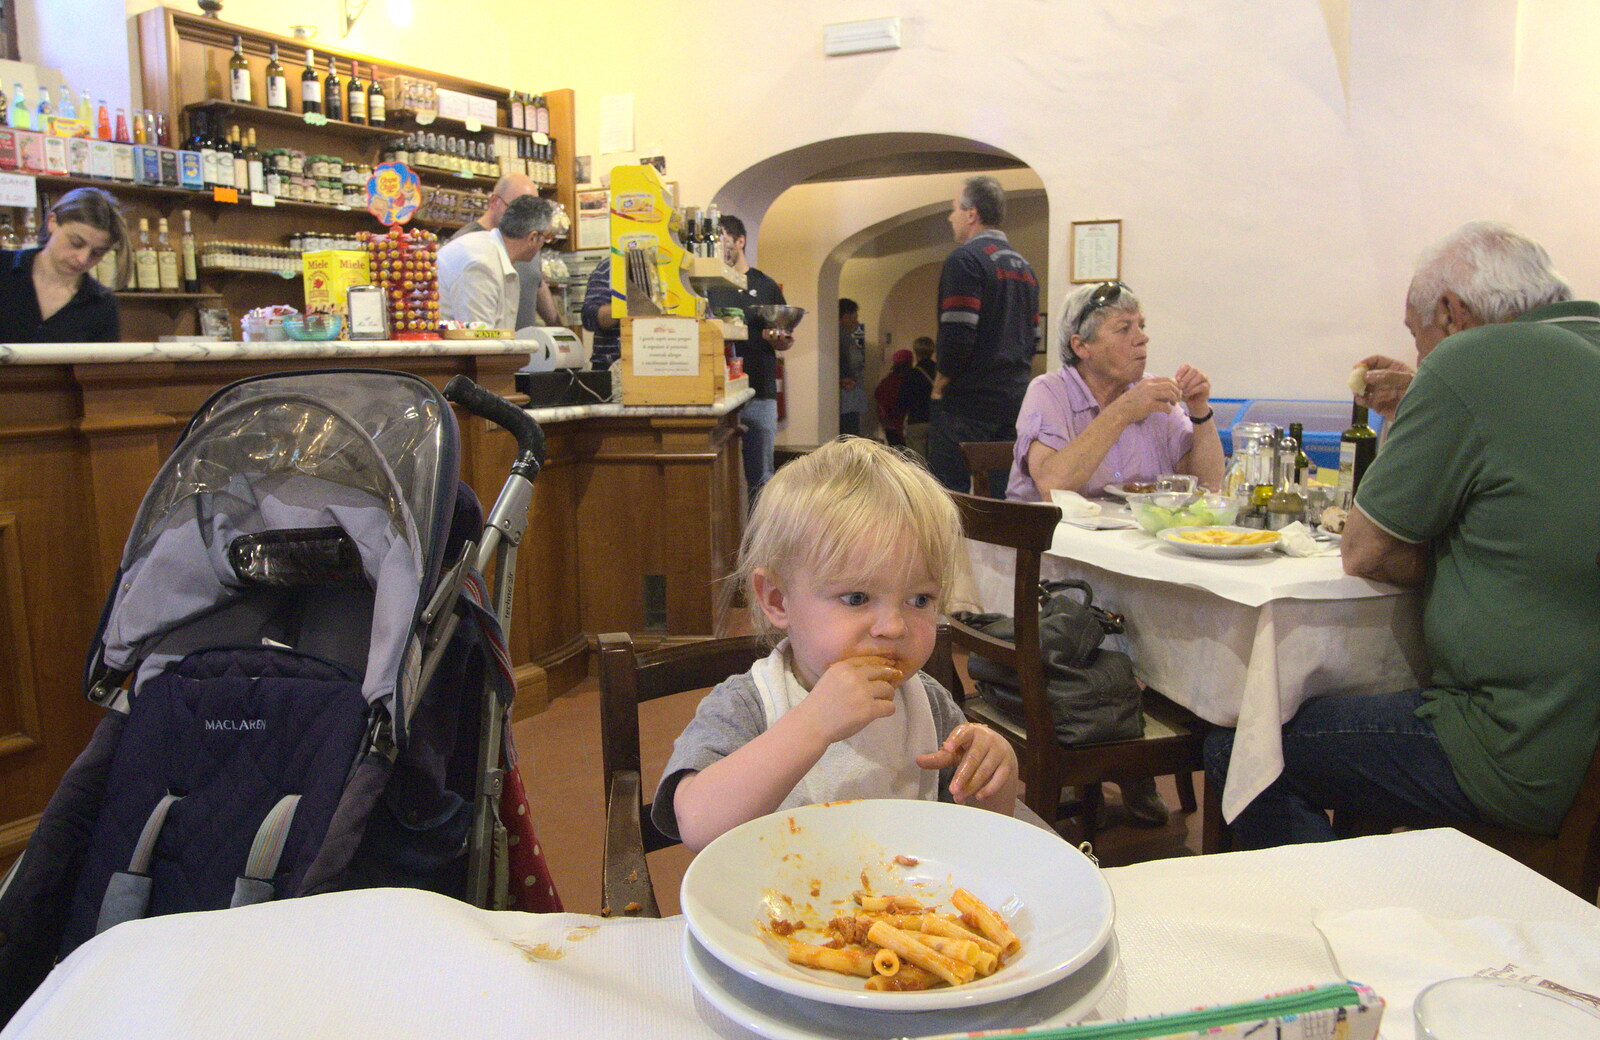 Harry tucks in to some pasta in the restaurant from La Verna Monastery and the Fireflies of Tuscany, Italy - 14th June 2013